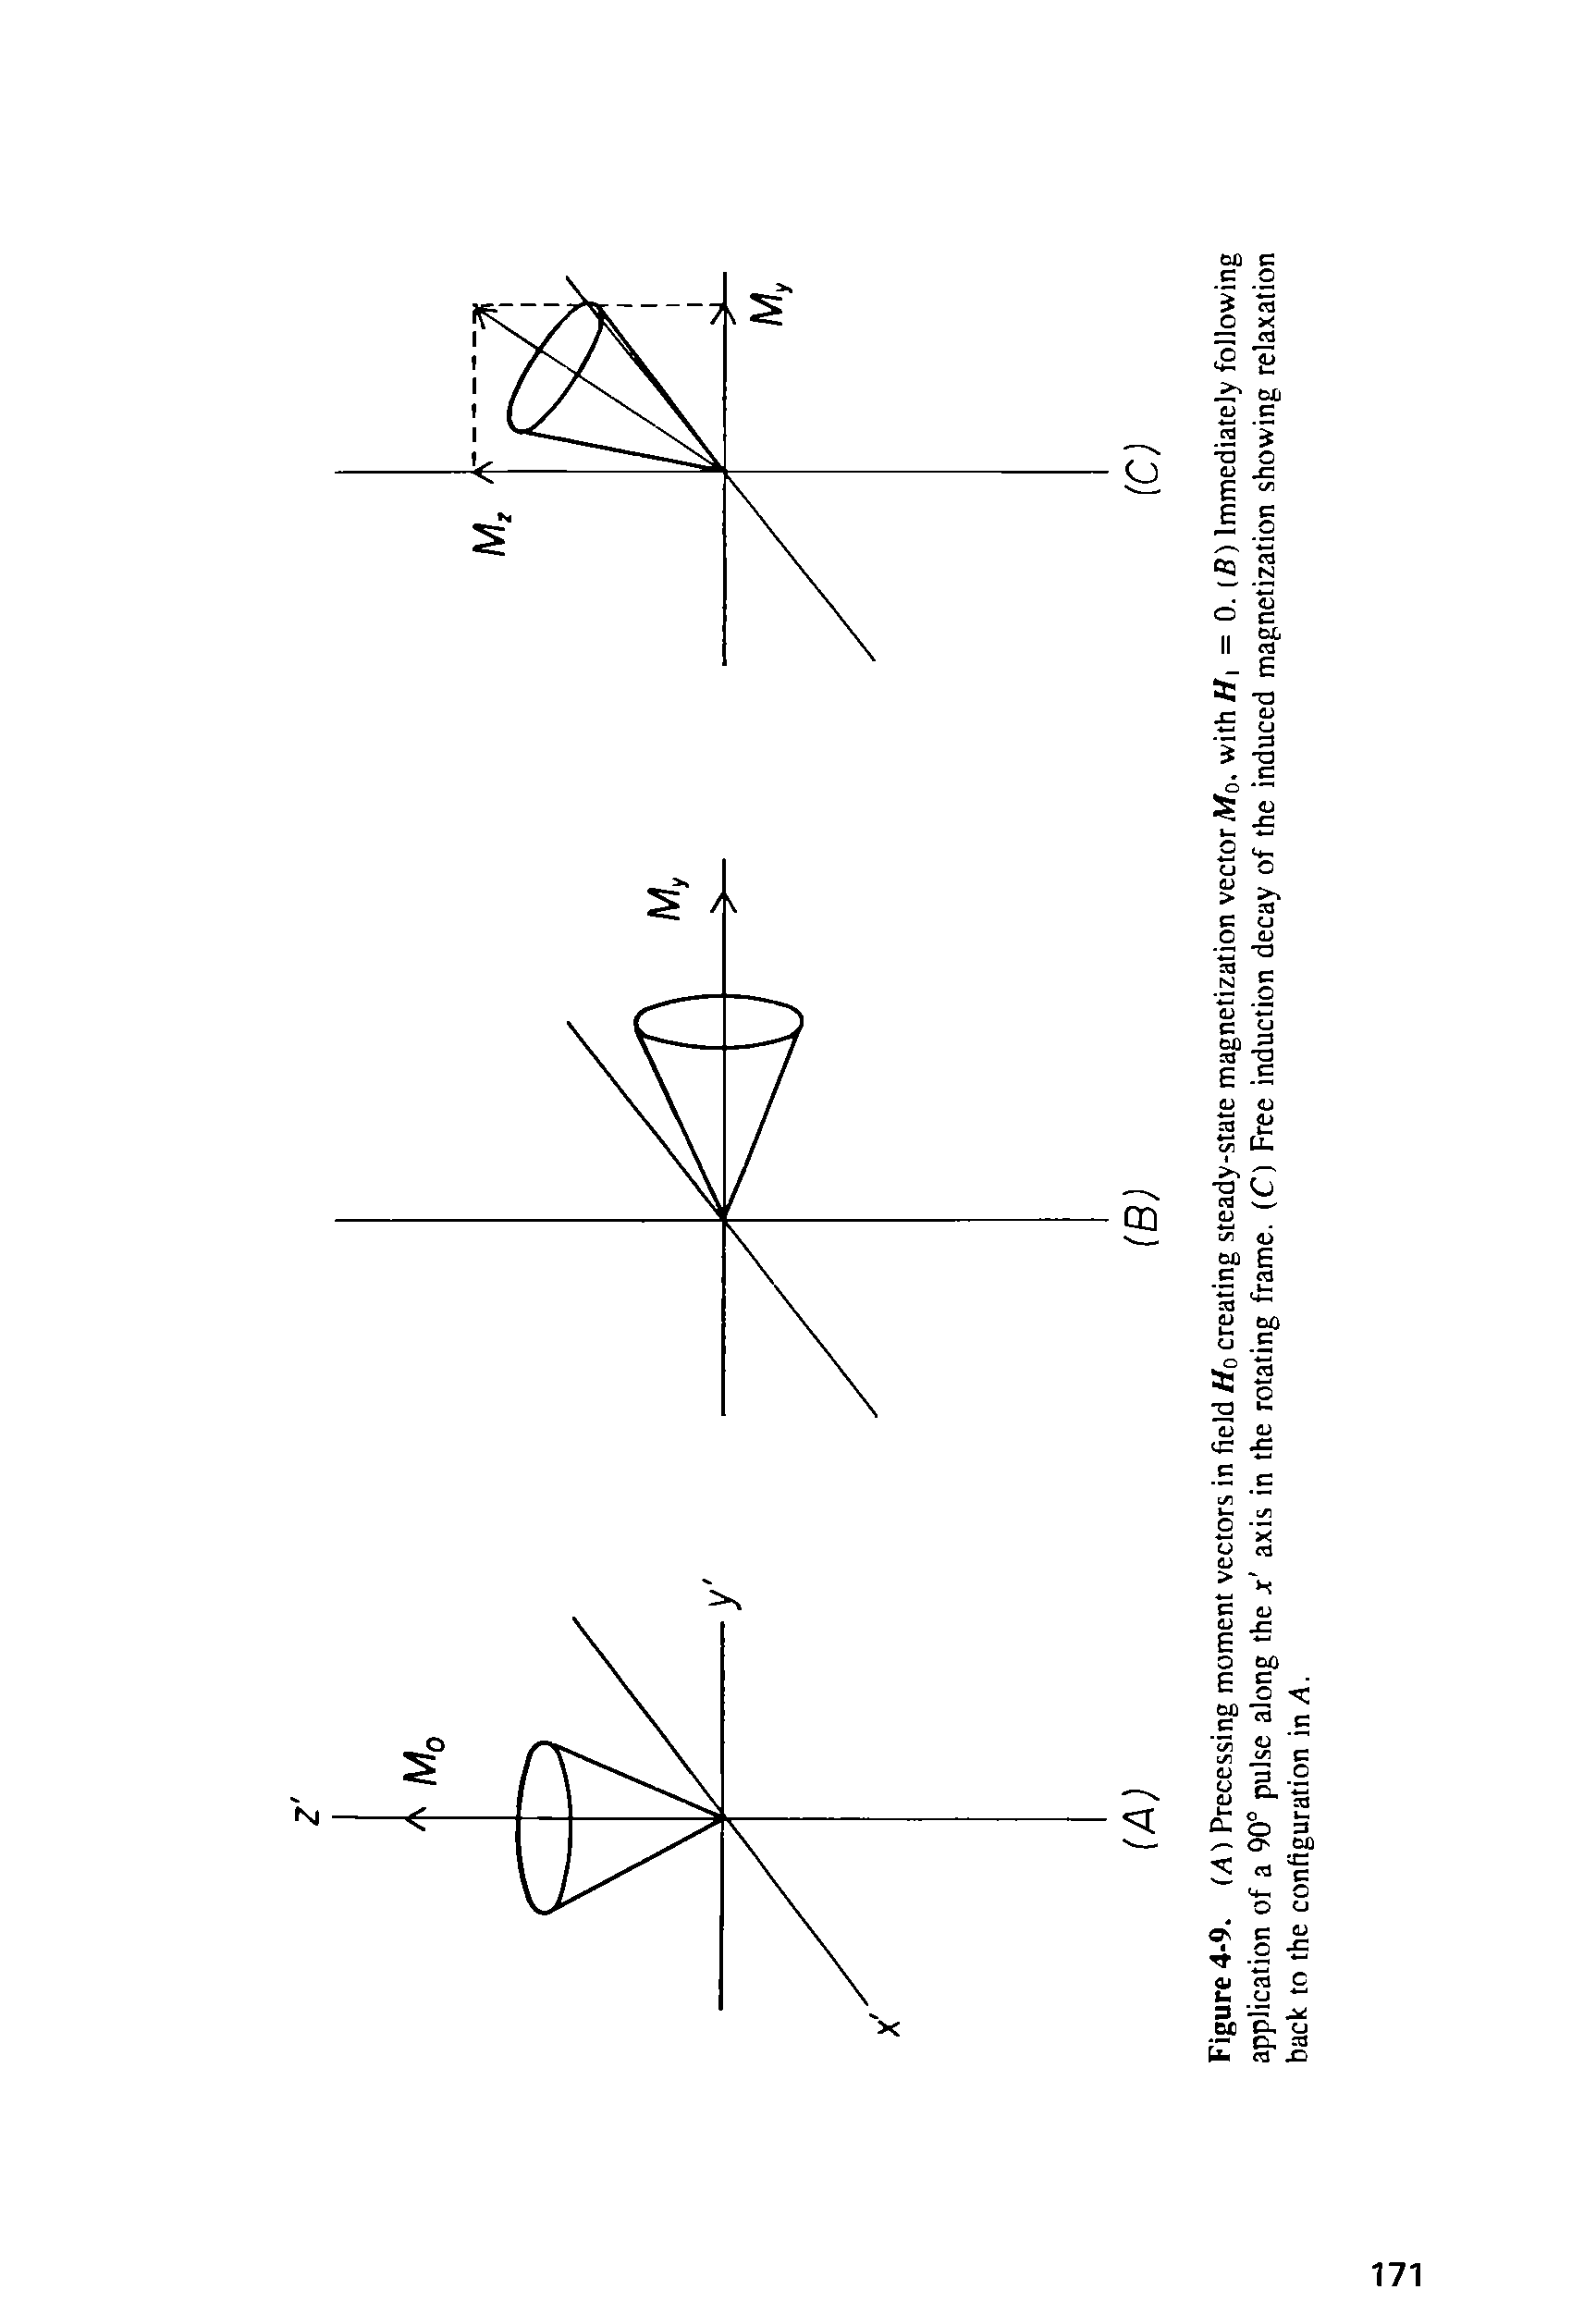 Figure 4-9. (Ai Precessing moment vectors in field tfo creating steady-state magnetization vector Afo. with//i = 0. (B) Immediately following application of a 90° pulse along the x axis in the rotating frame. (C) Free induction decay of the induced magnetization showing relaxation back to the configuration in A.